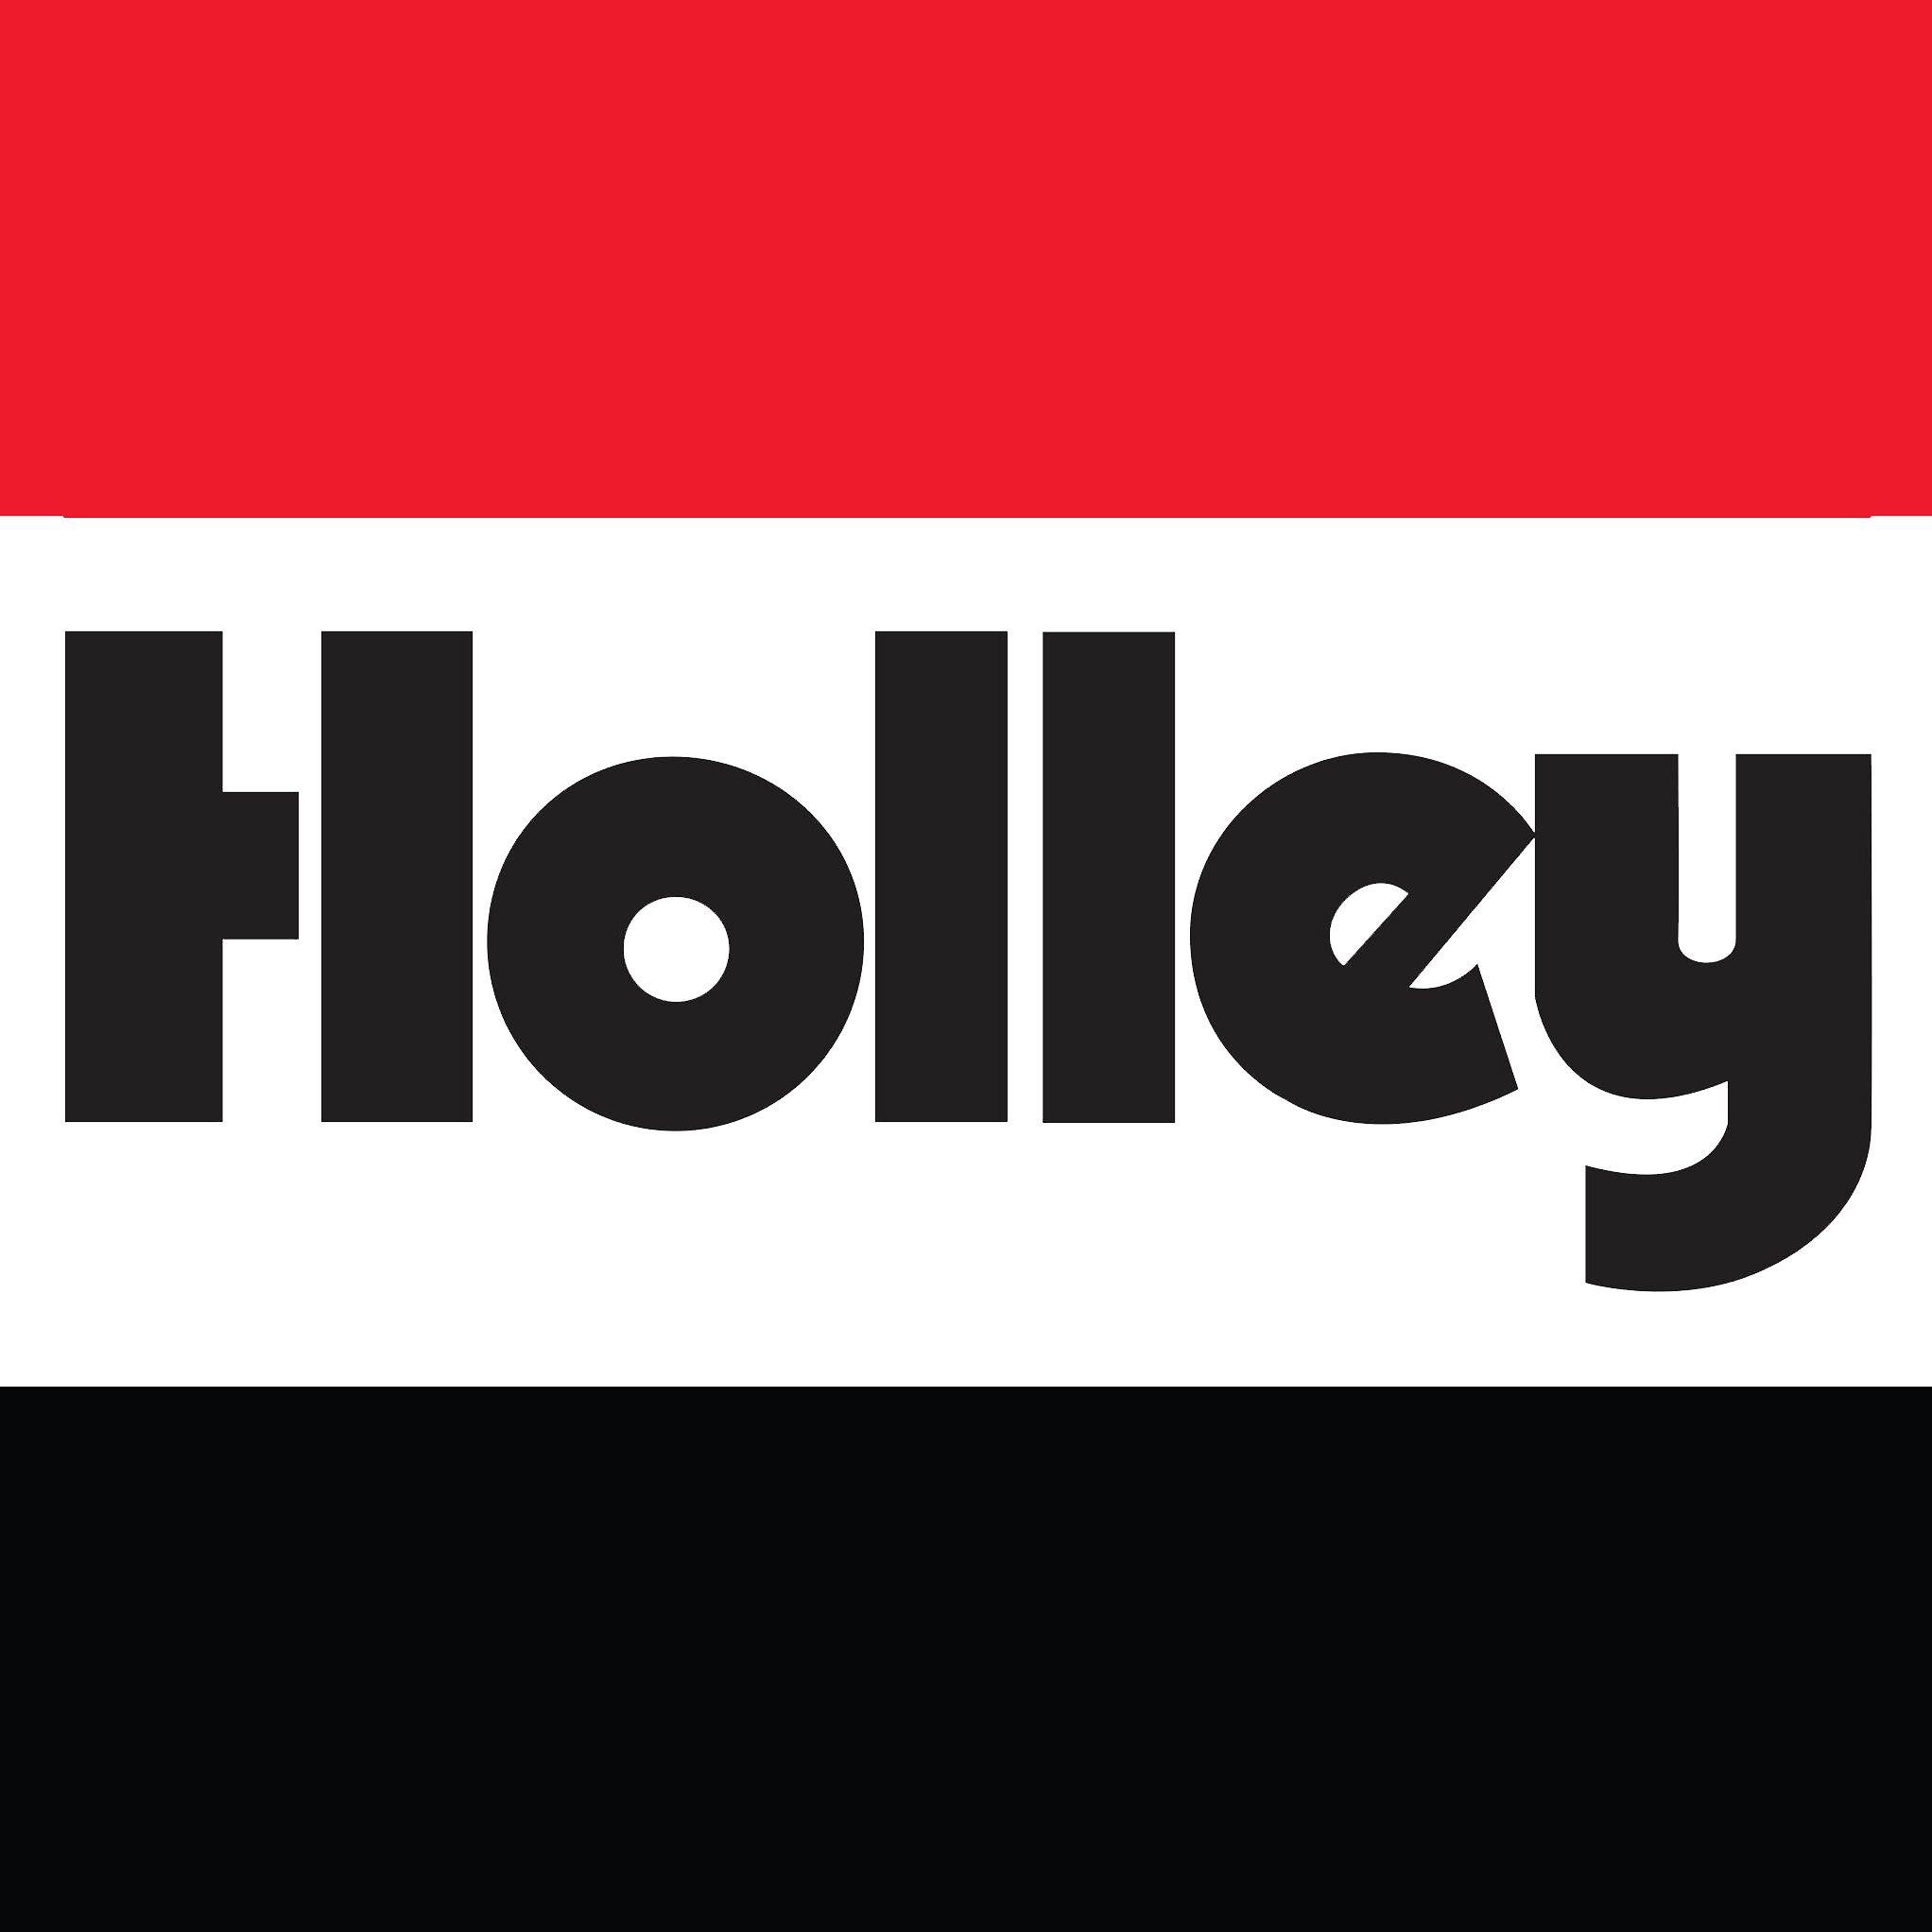 Holley